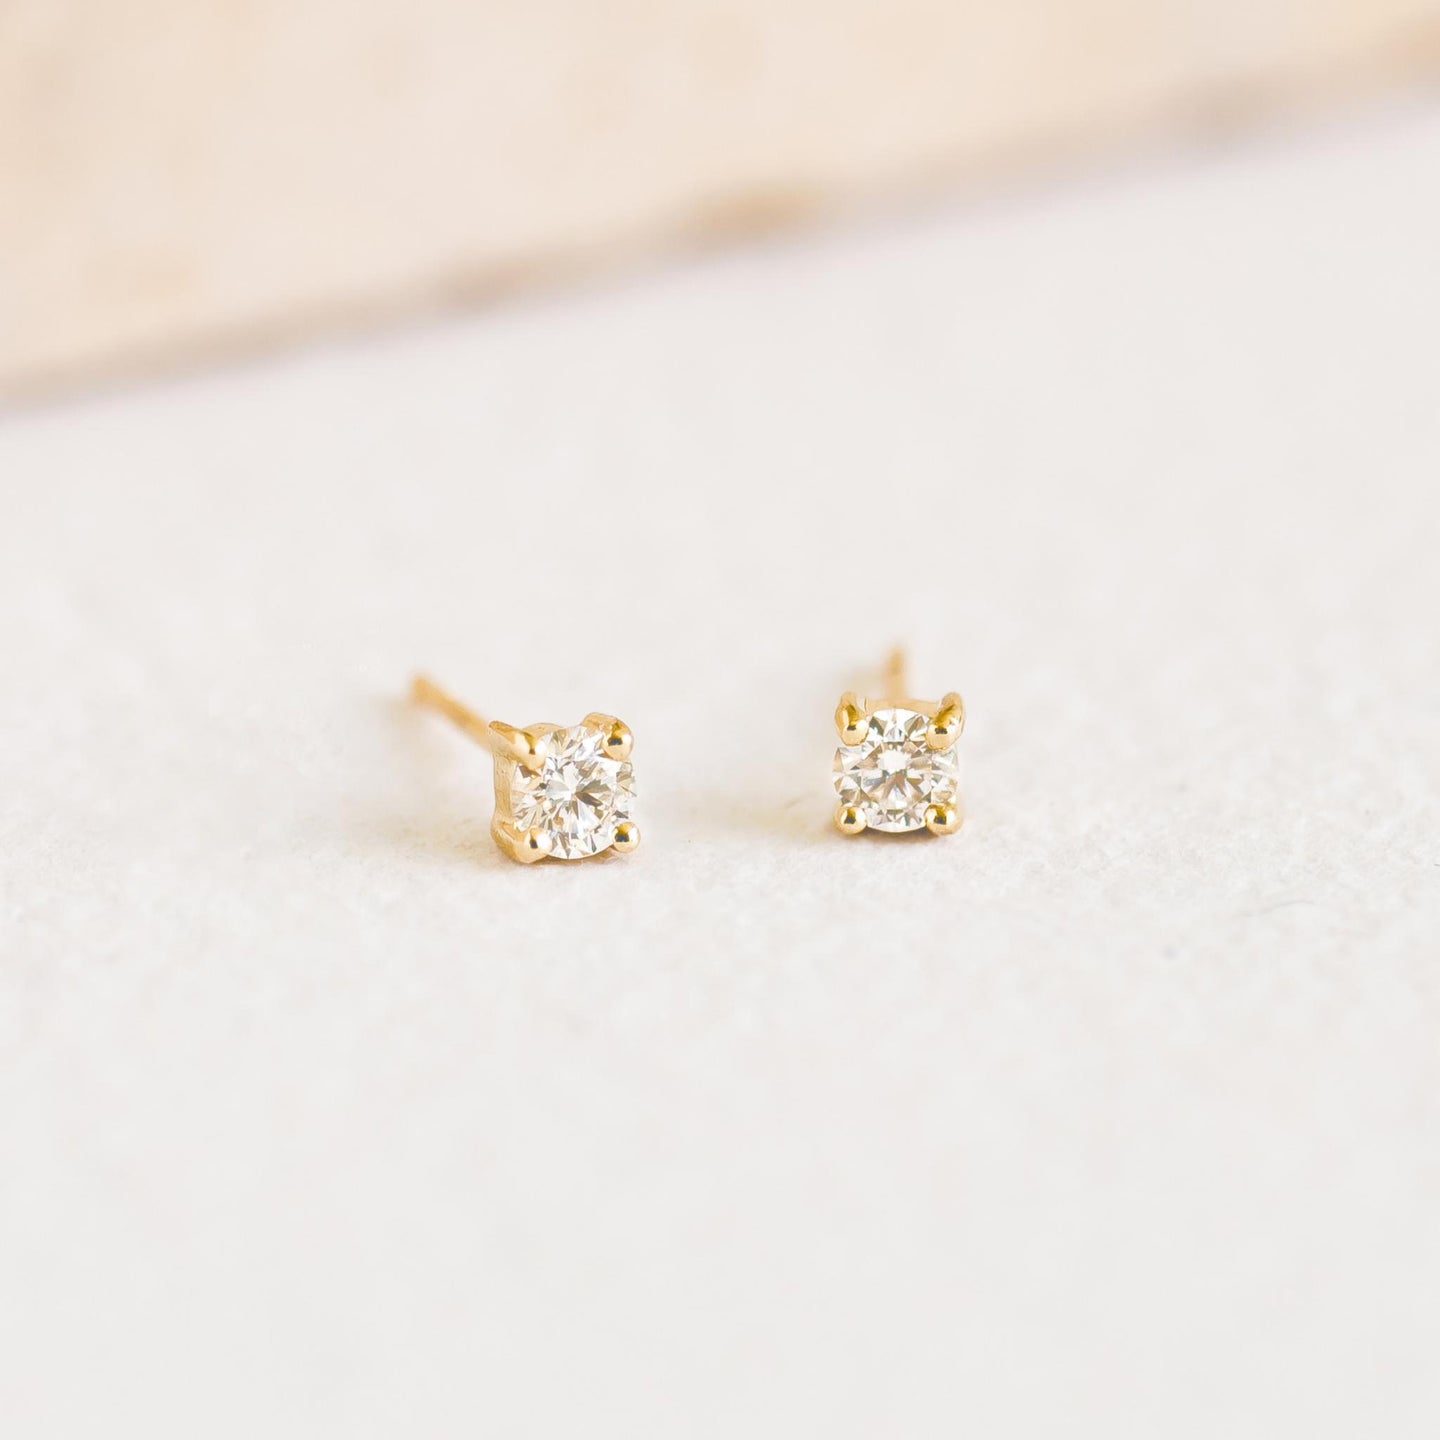 2.5mm Tiny Natural Diamond Stud Earrings in 925 Sterling Silver